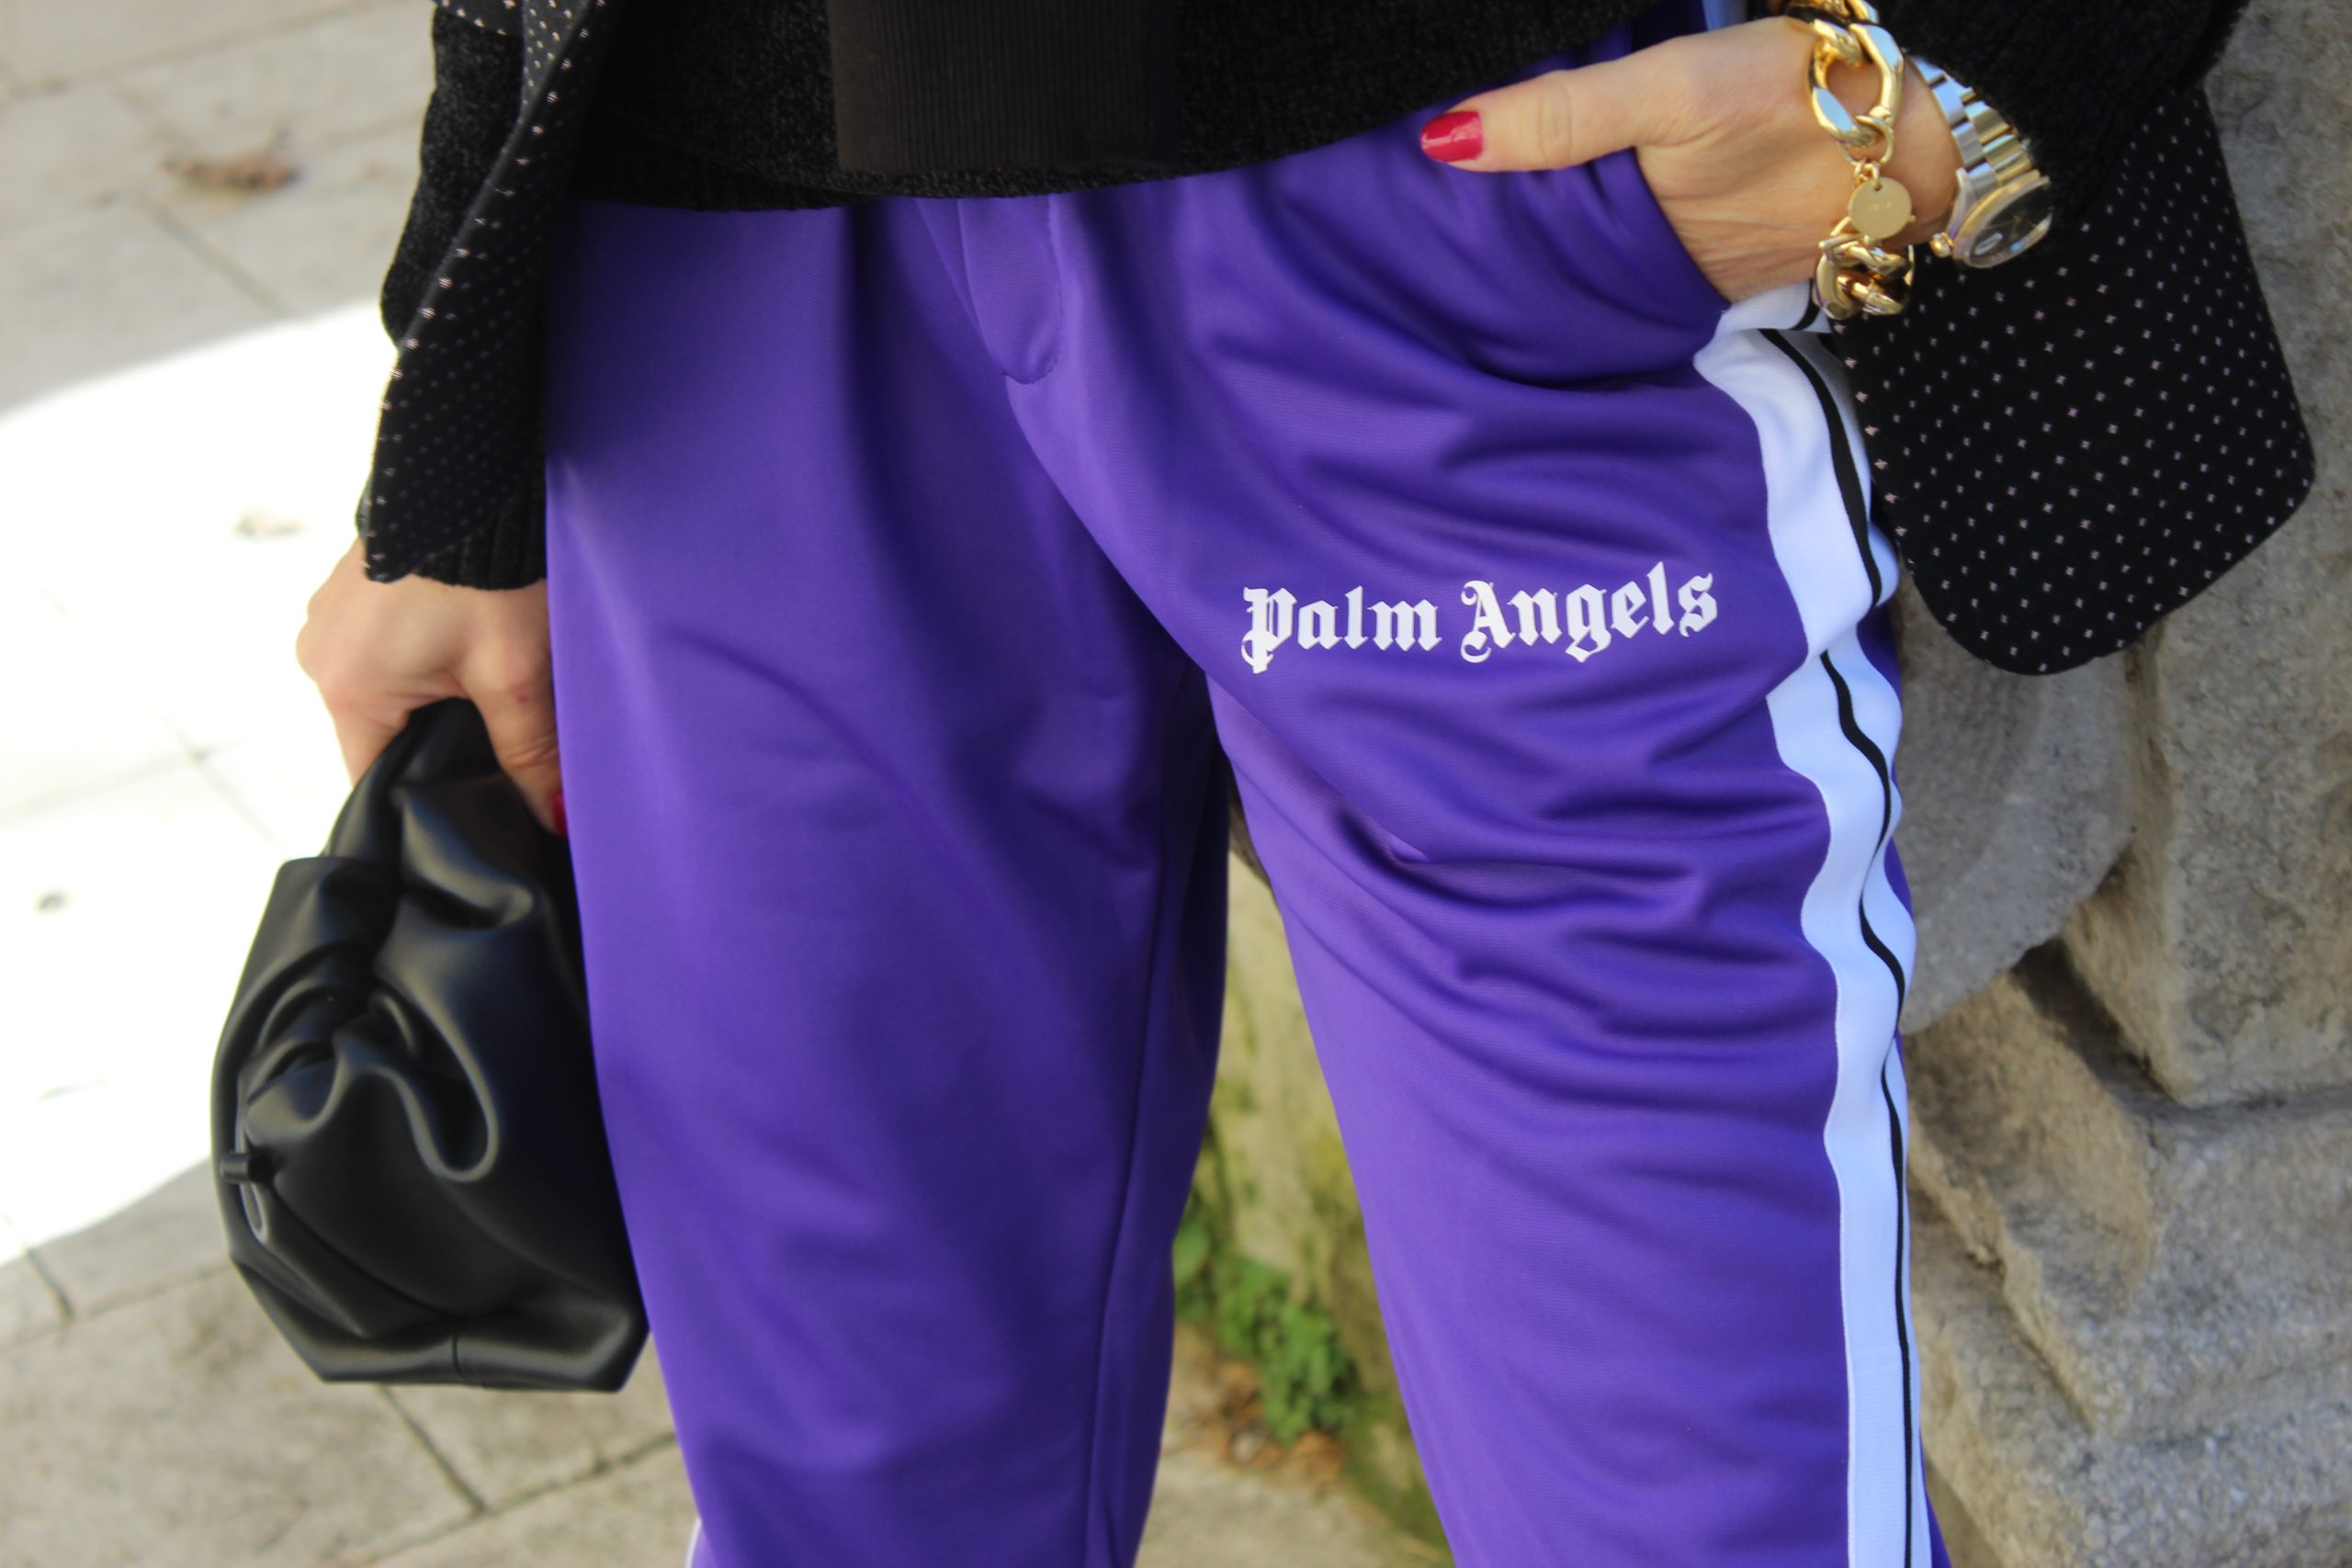 sporty chic style PALM ANGELS trucksuit, hoodie and hat CRISTINAEFFE blazer  BOTTEGA VENETA clutch and sandals